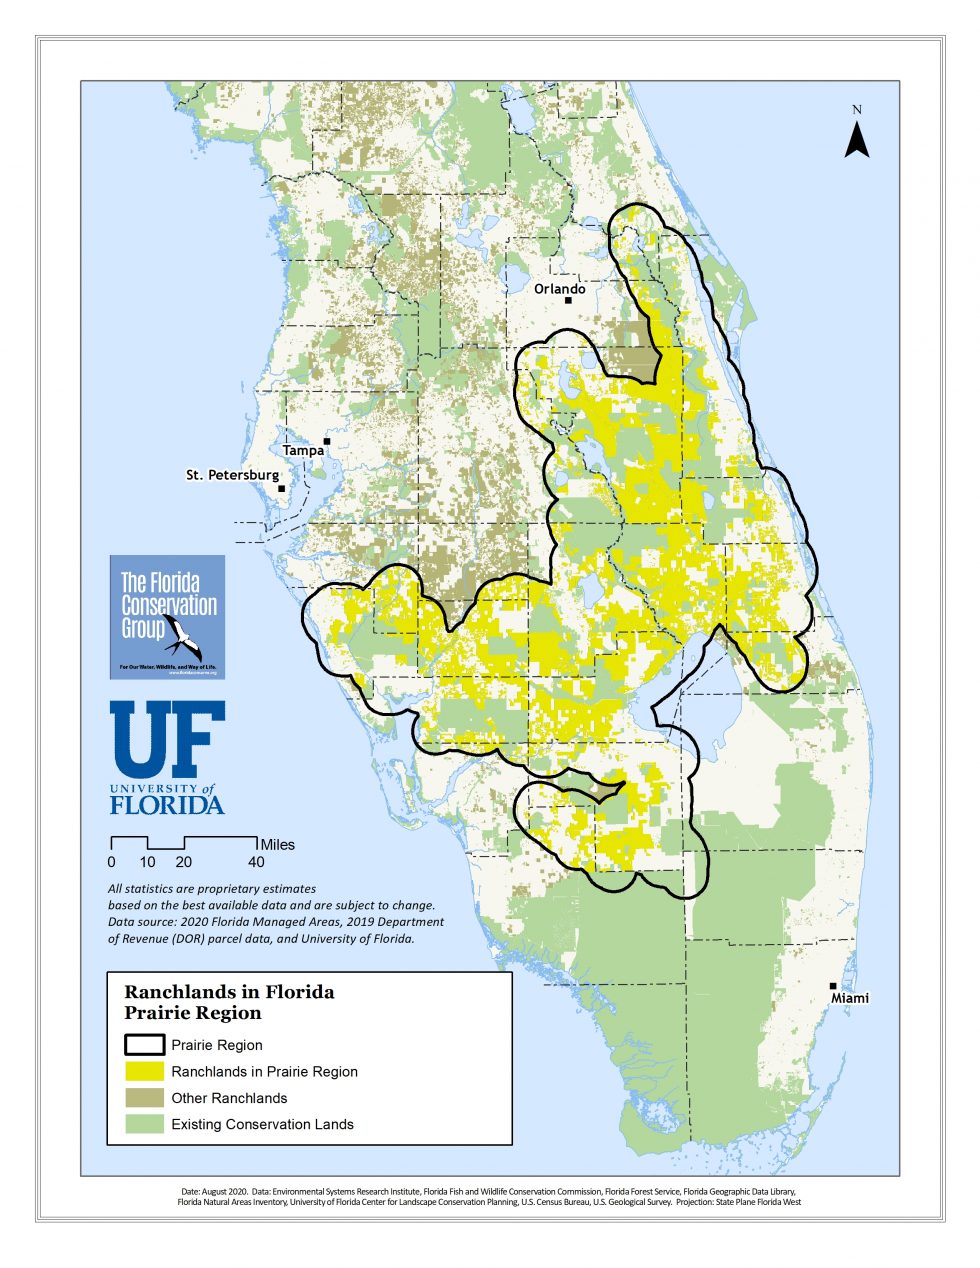 Conservation Science | Florida Conservation Group